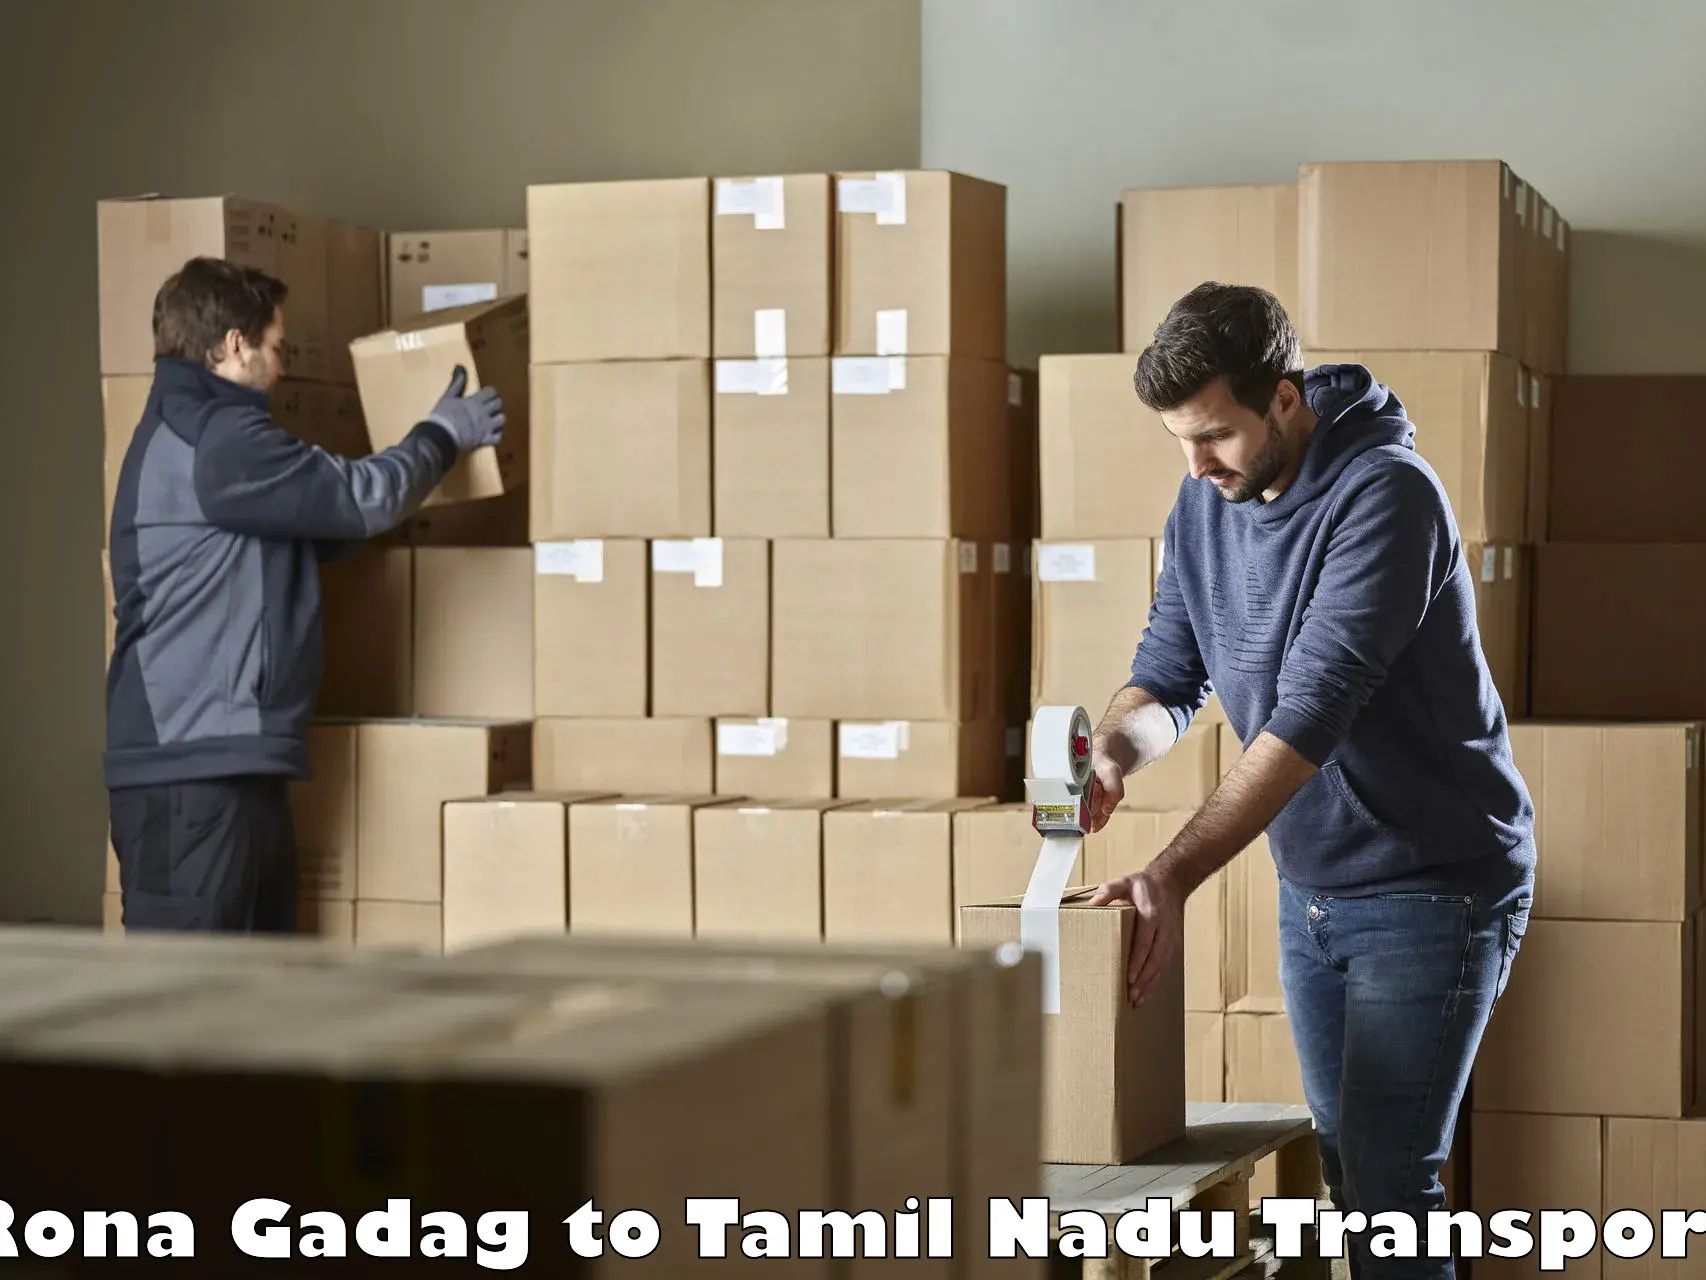 Domestic goods transportation services Rona Gadag to Shanmugha Arts Science Technology and Research Academy Thanjavur